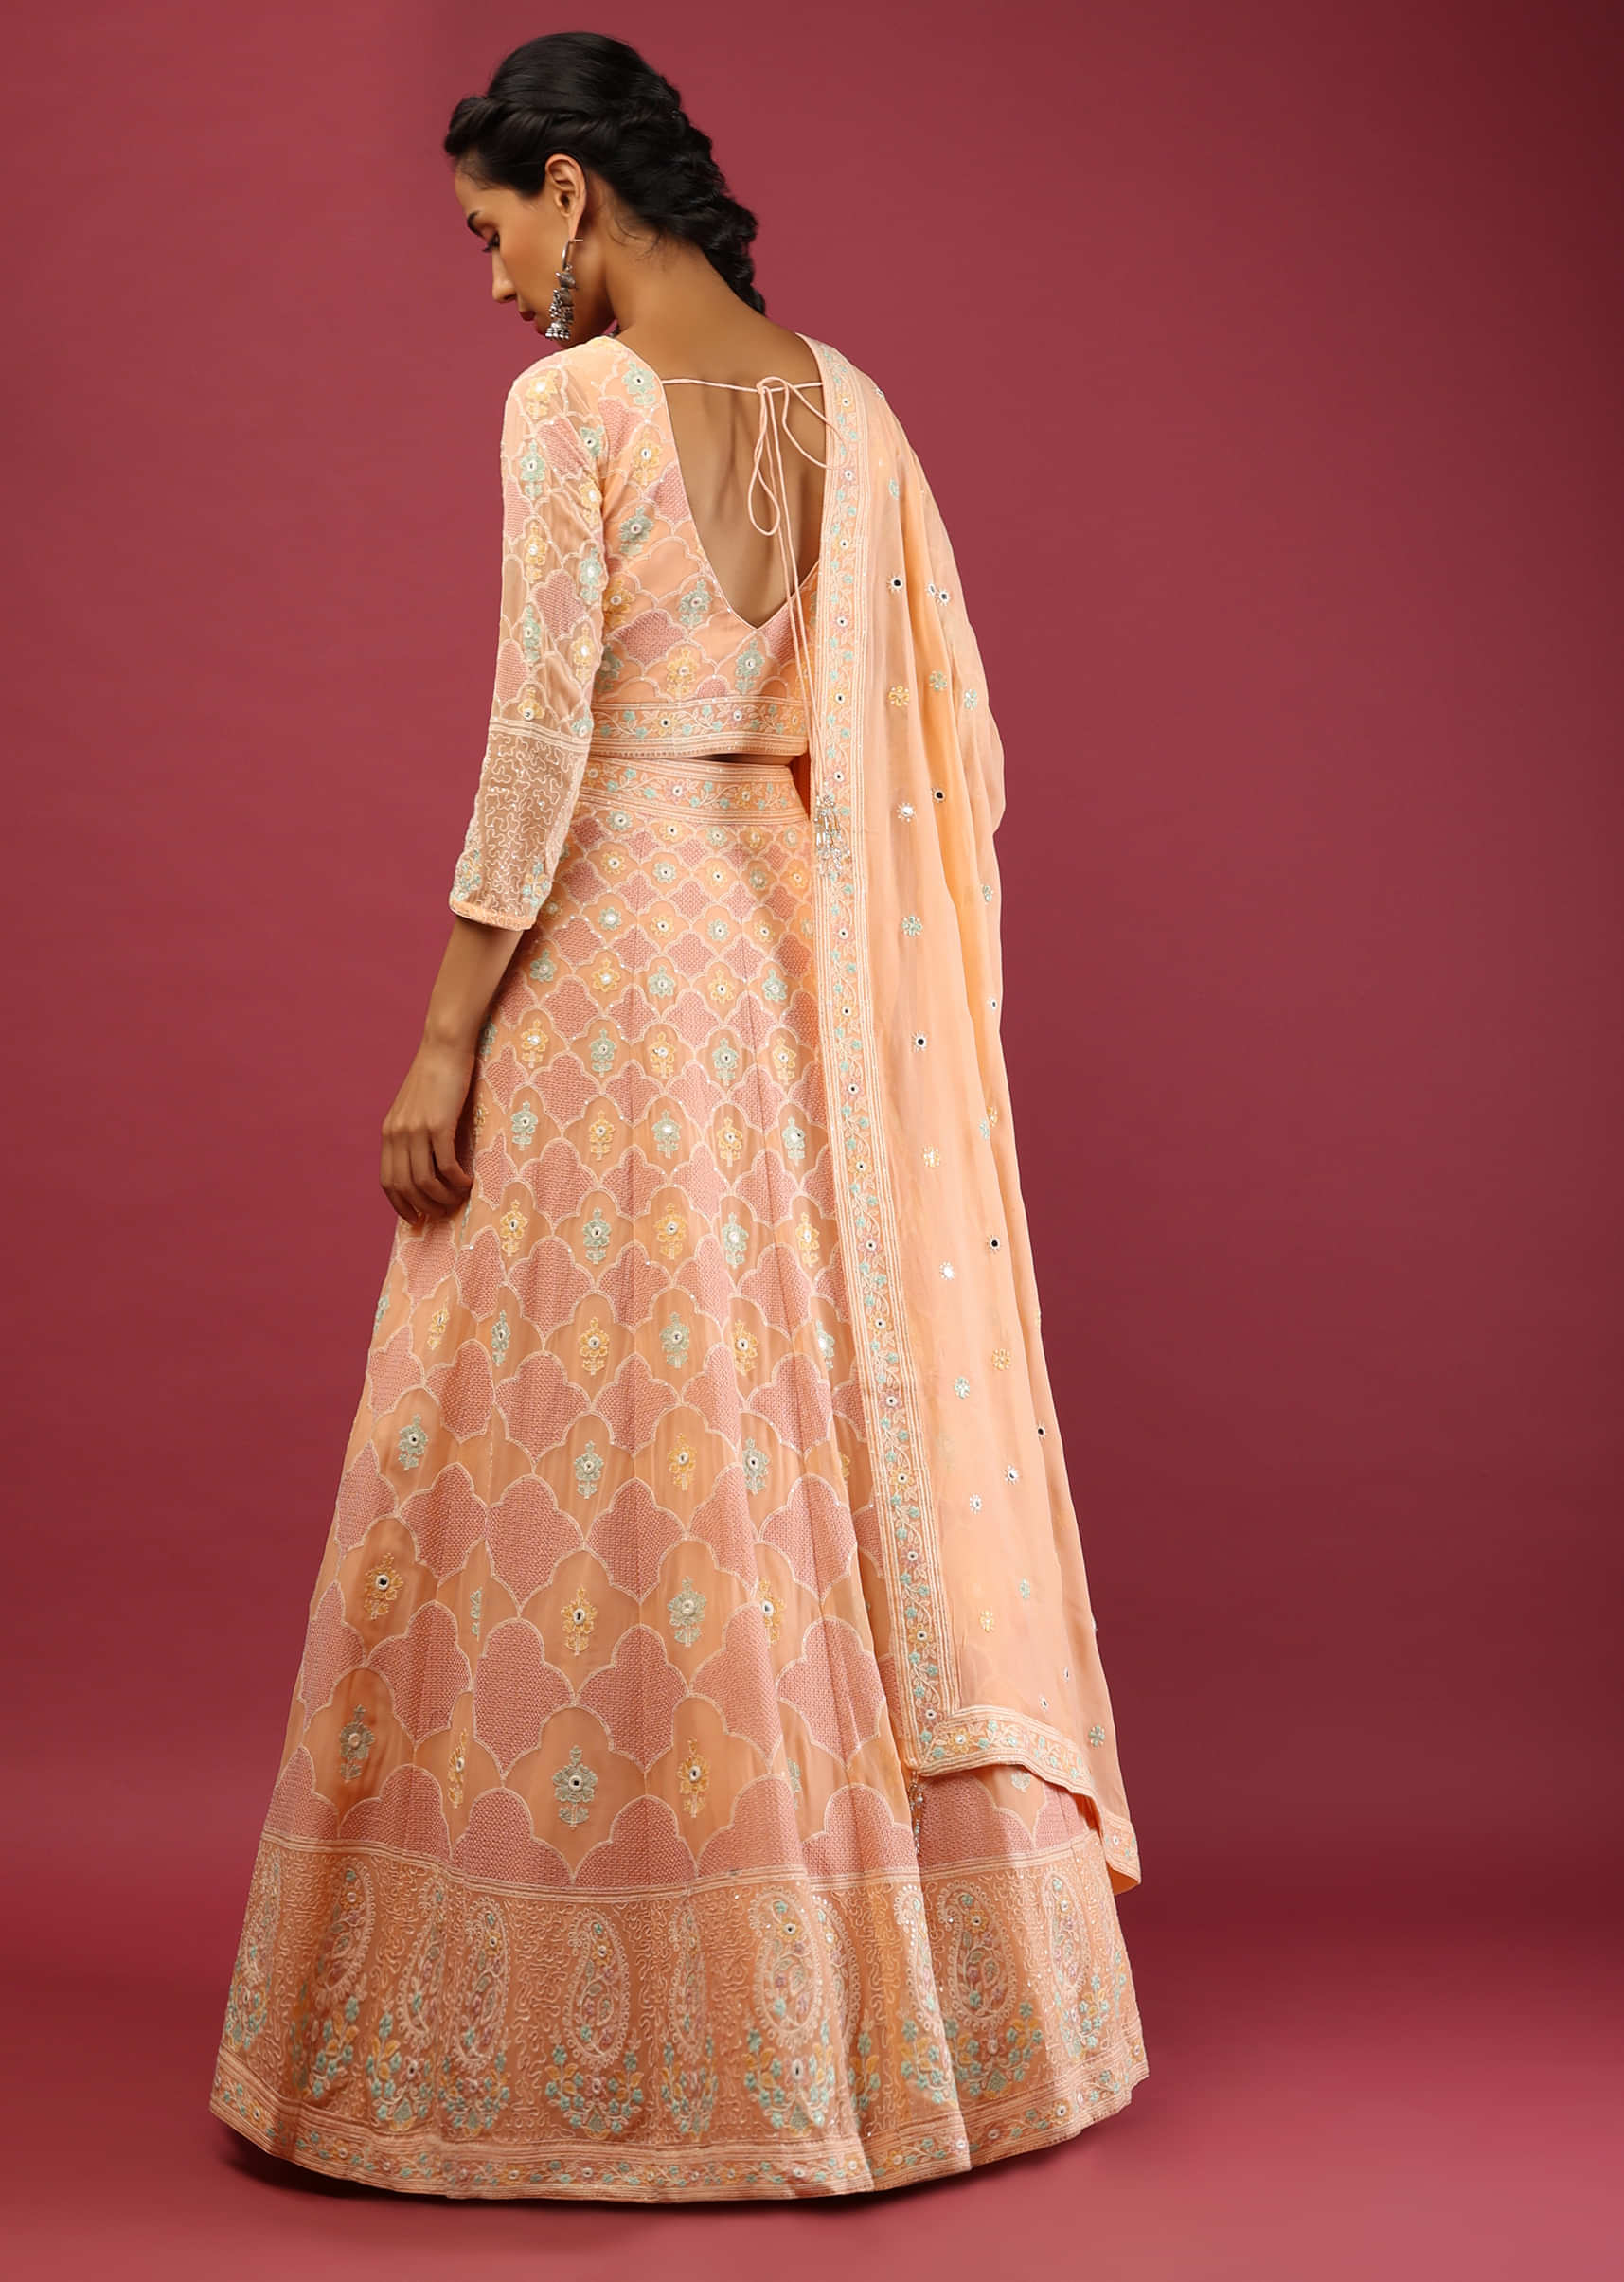 Peach Lehenga Choli With Multi Colored Lucknowi Thread Embroidered Moroccan Jaal And Floral Motifs Online - Kalki Fashion